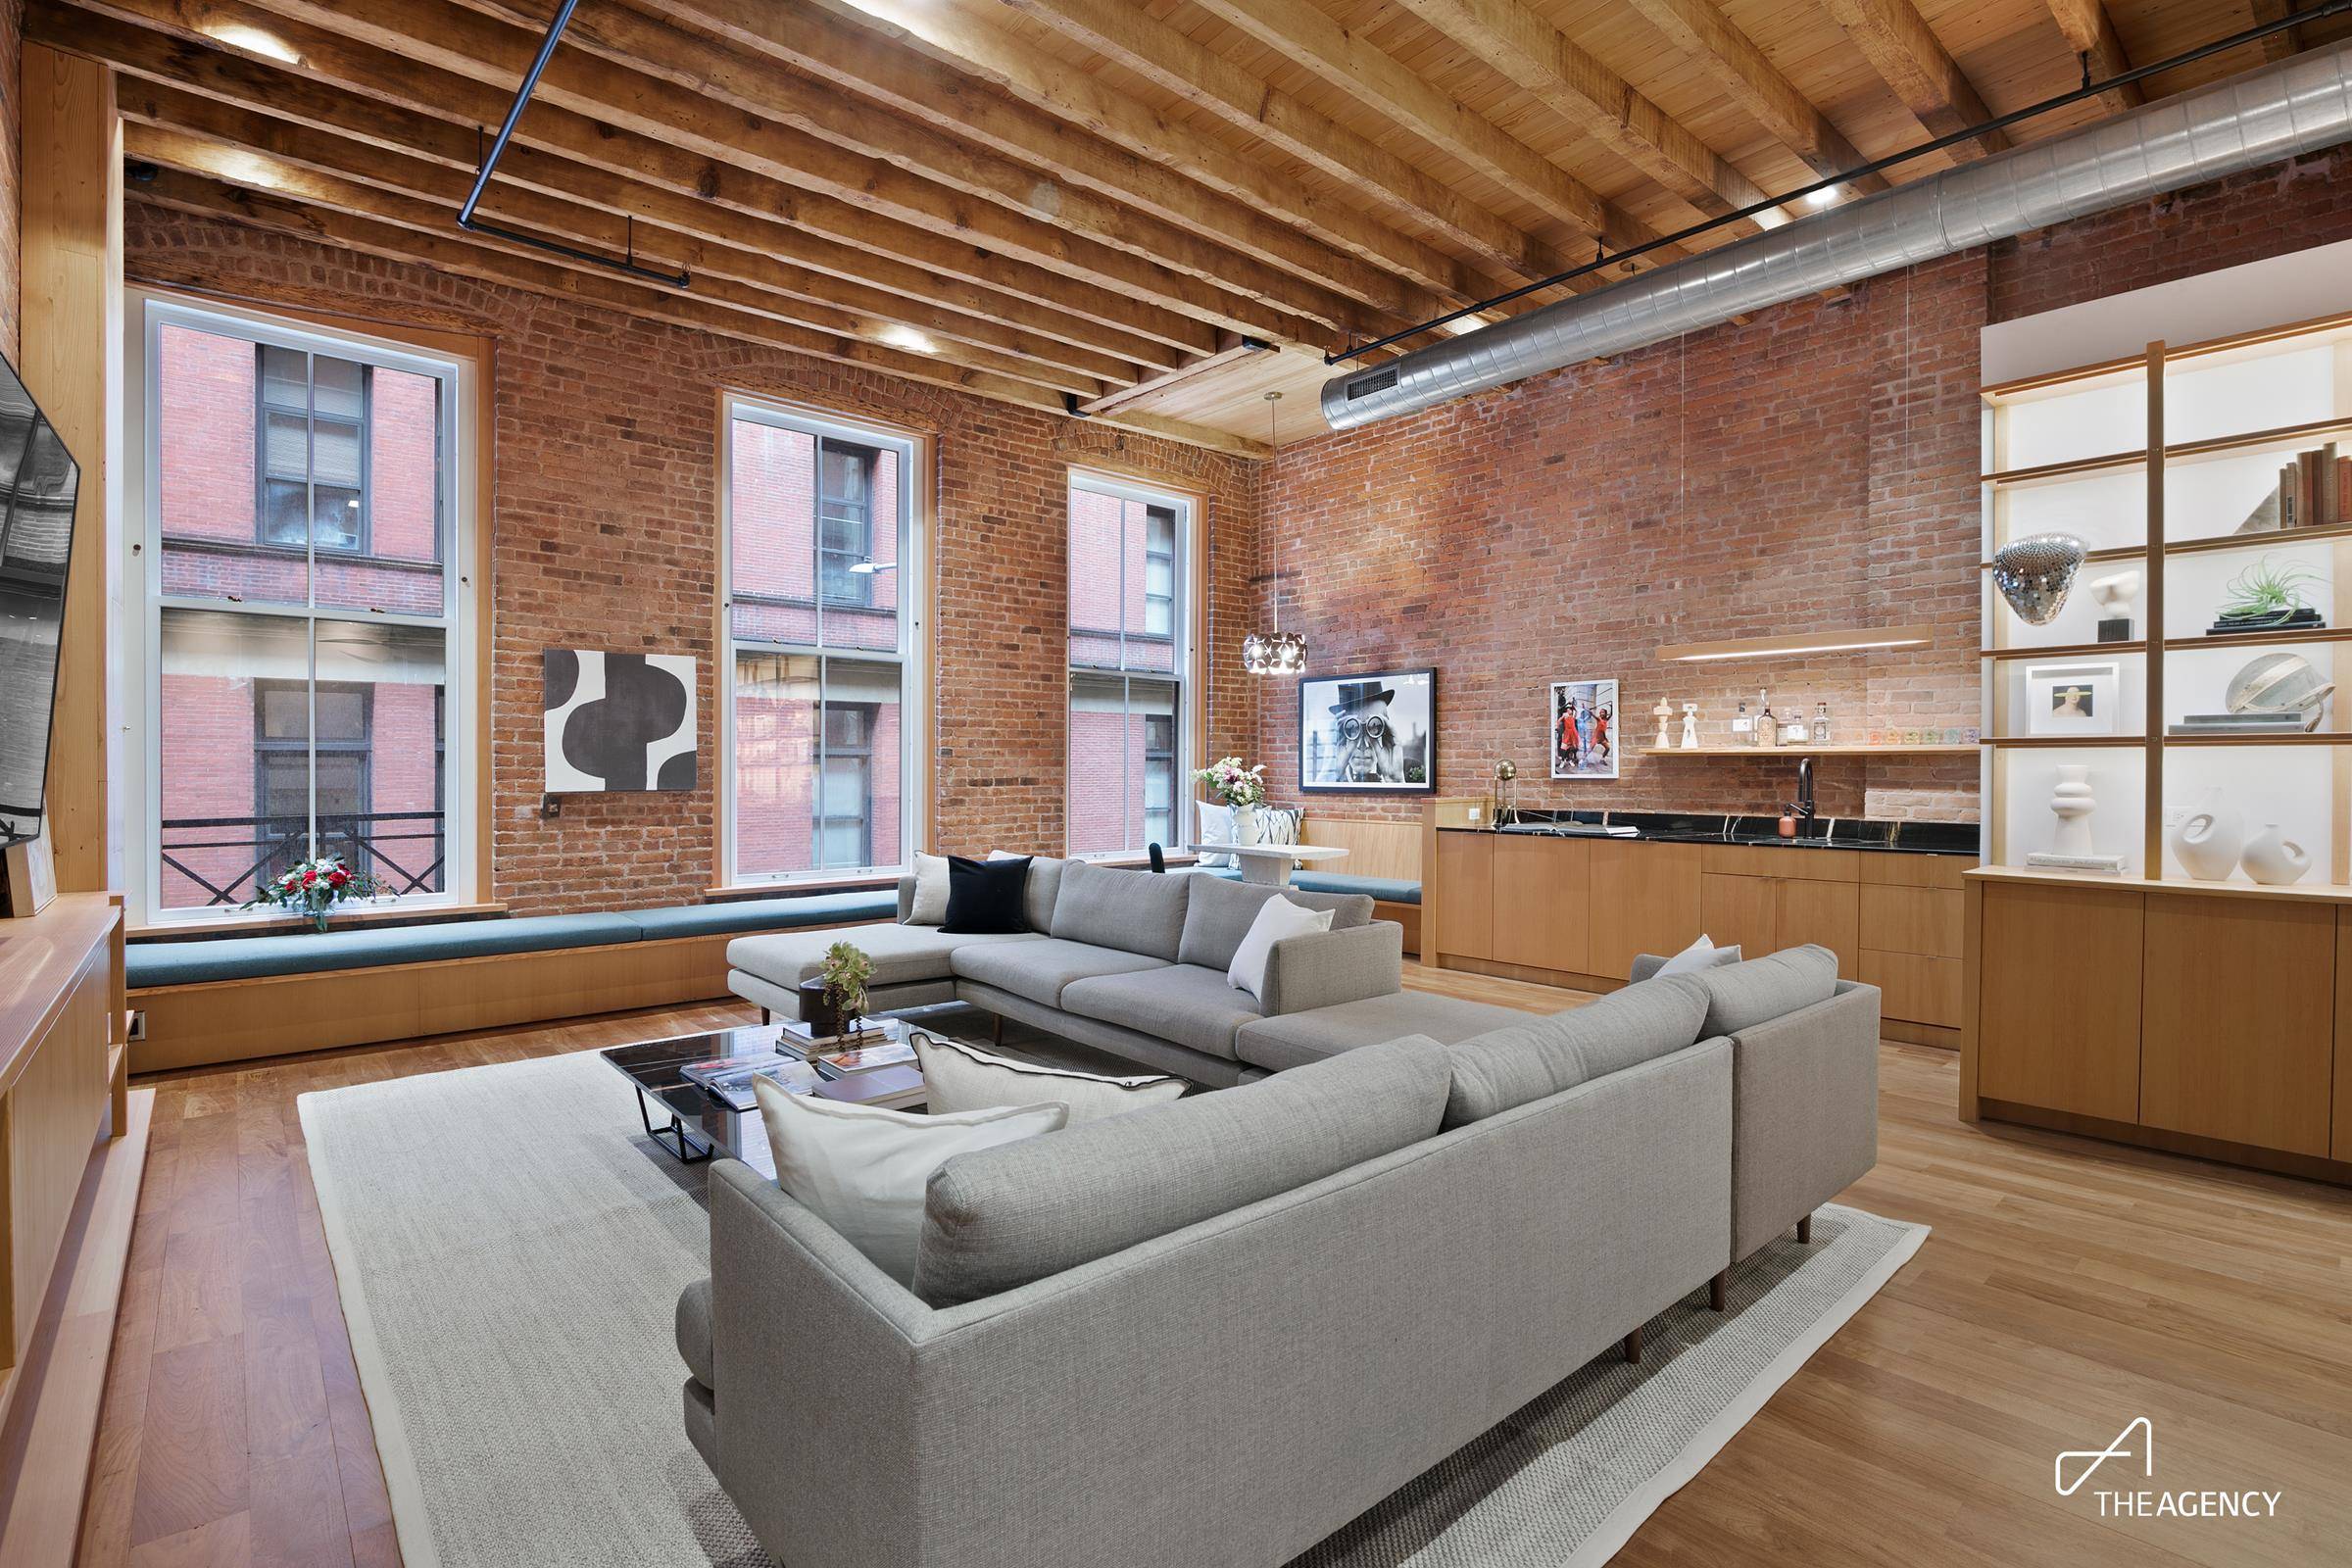 This exquisitely renovated and restored 4200 square foot duplex loft occupies two stories of a 5 story coop.